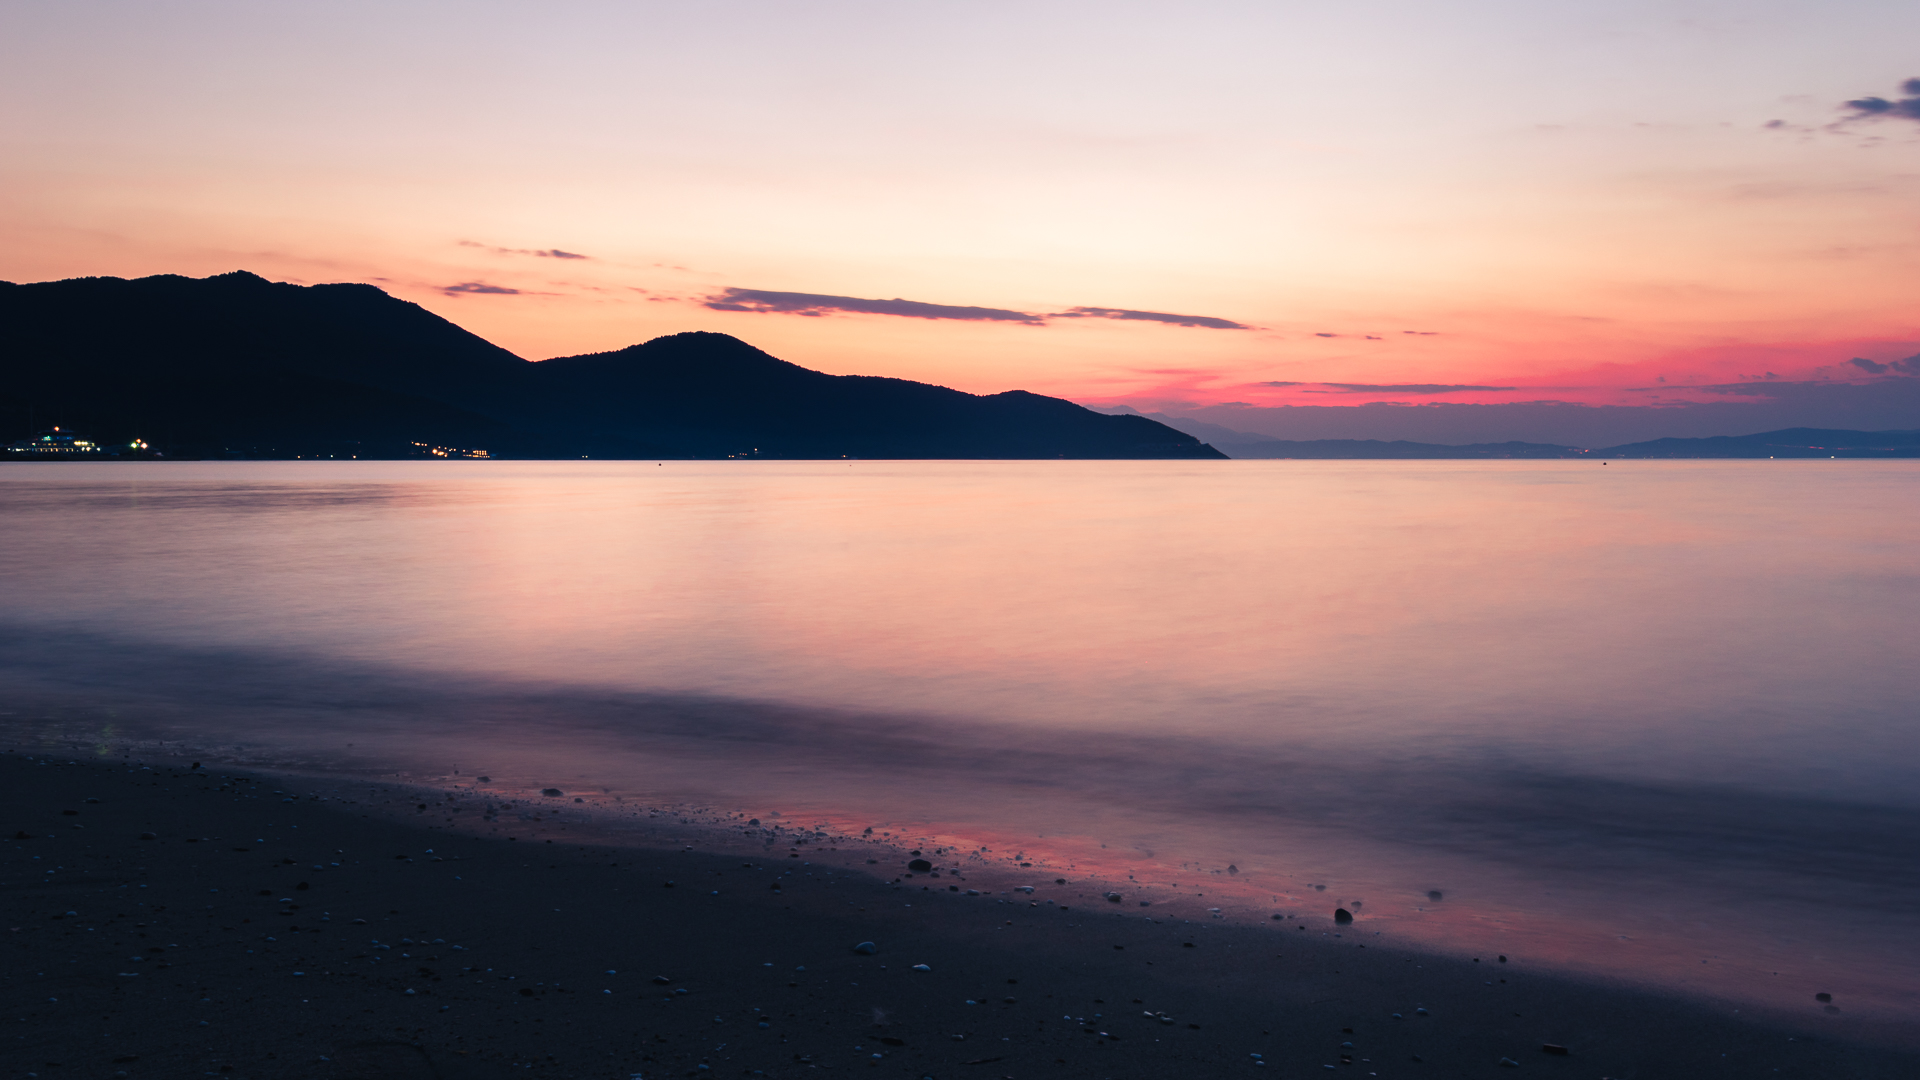 Long-exposure photo of a sunset in Thassos, Greece.